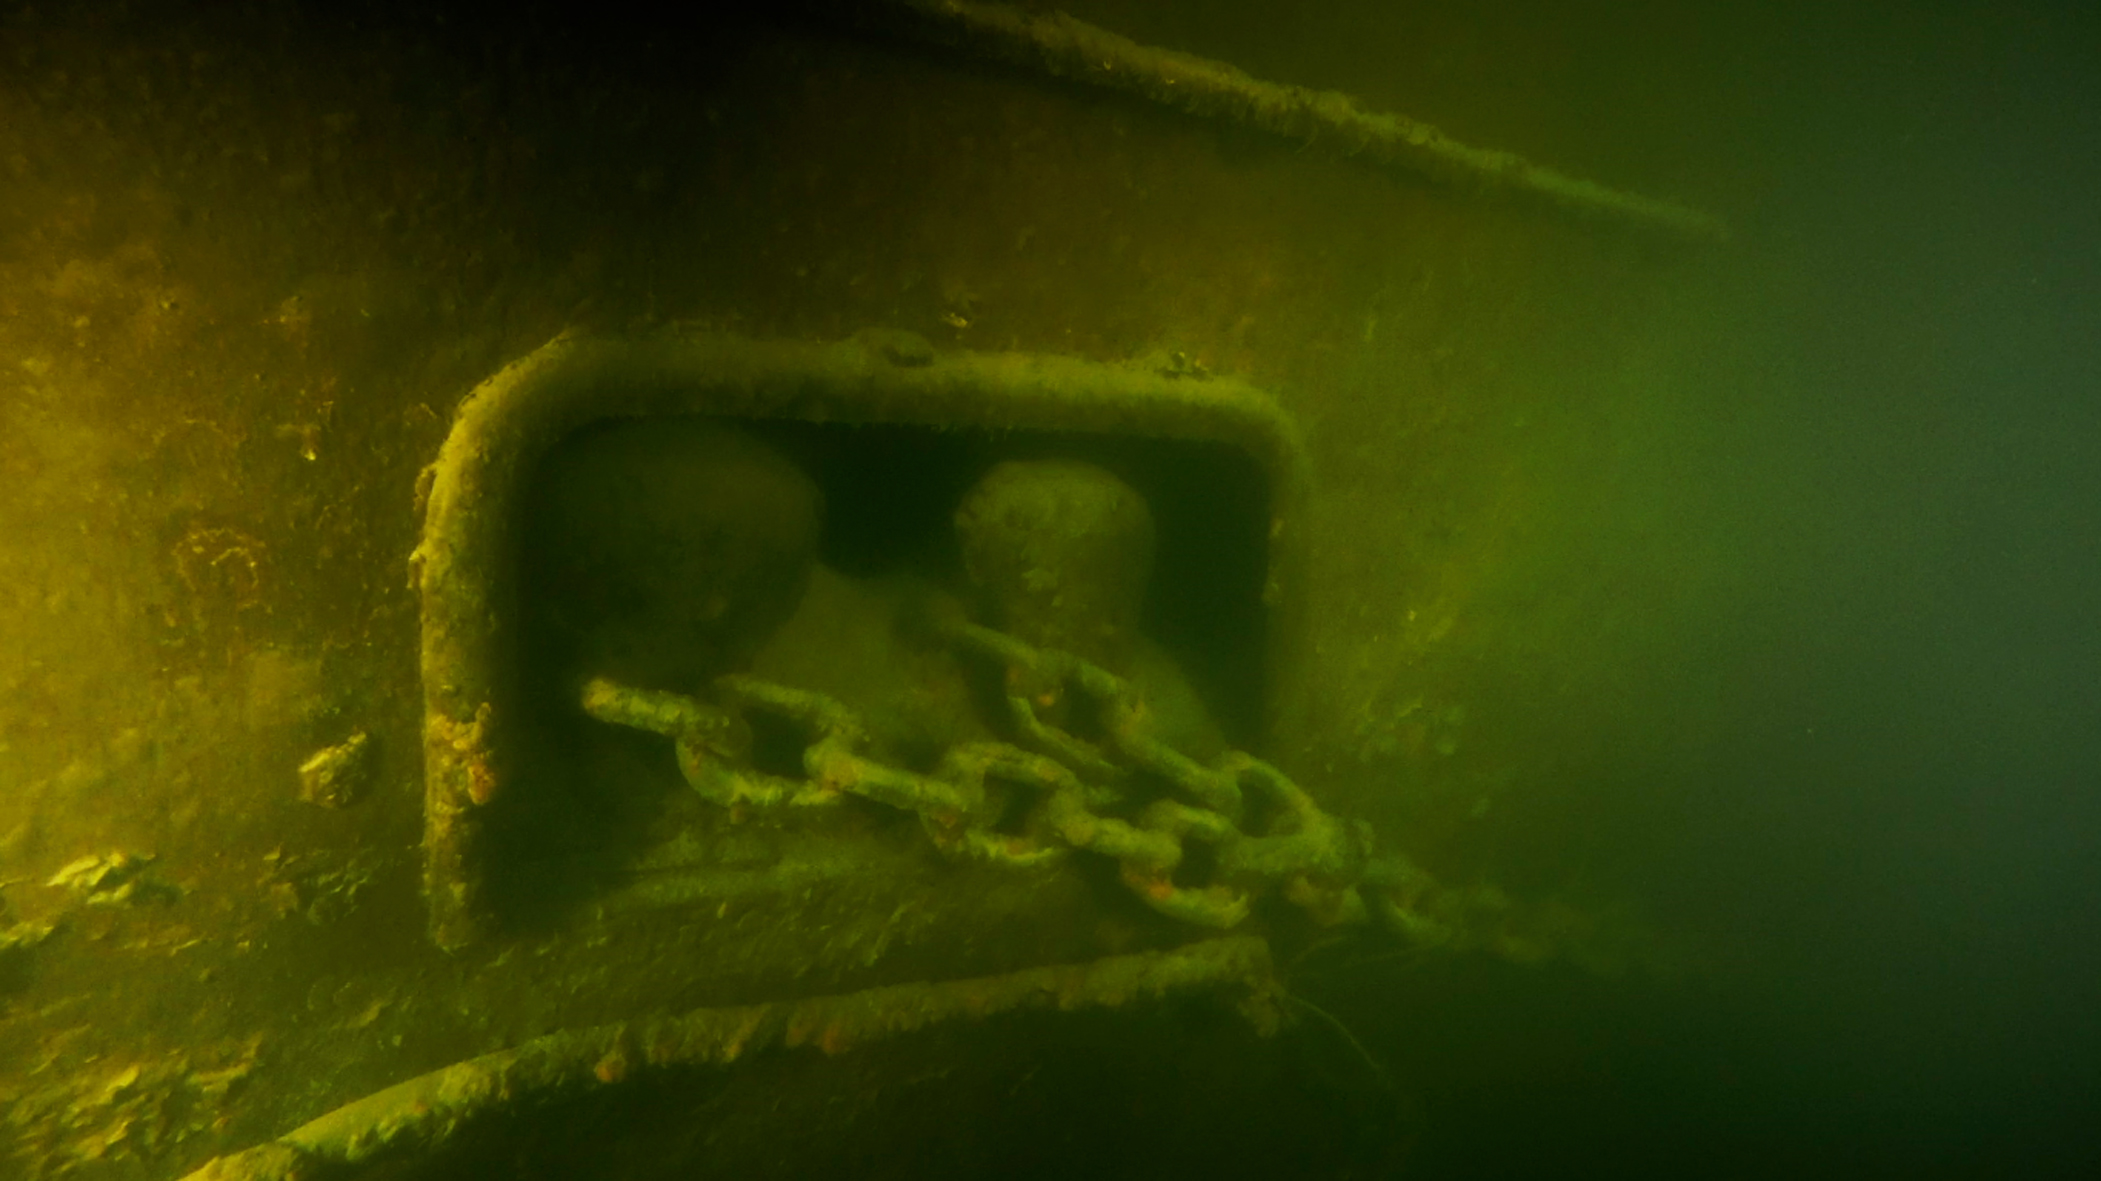 A detail of the anchor chain on the port side of the wreck. Photo by Andrea "Murdock" Alpini